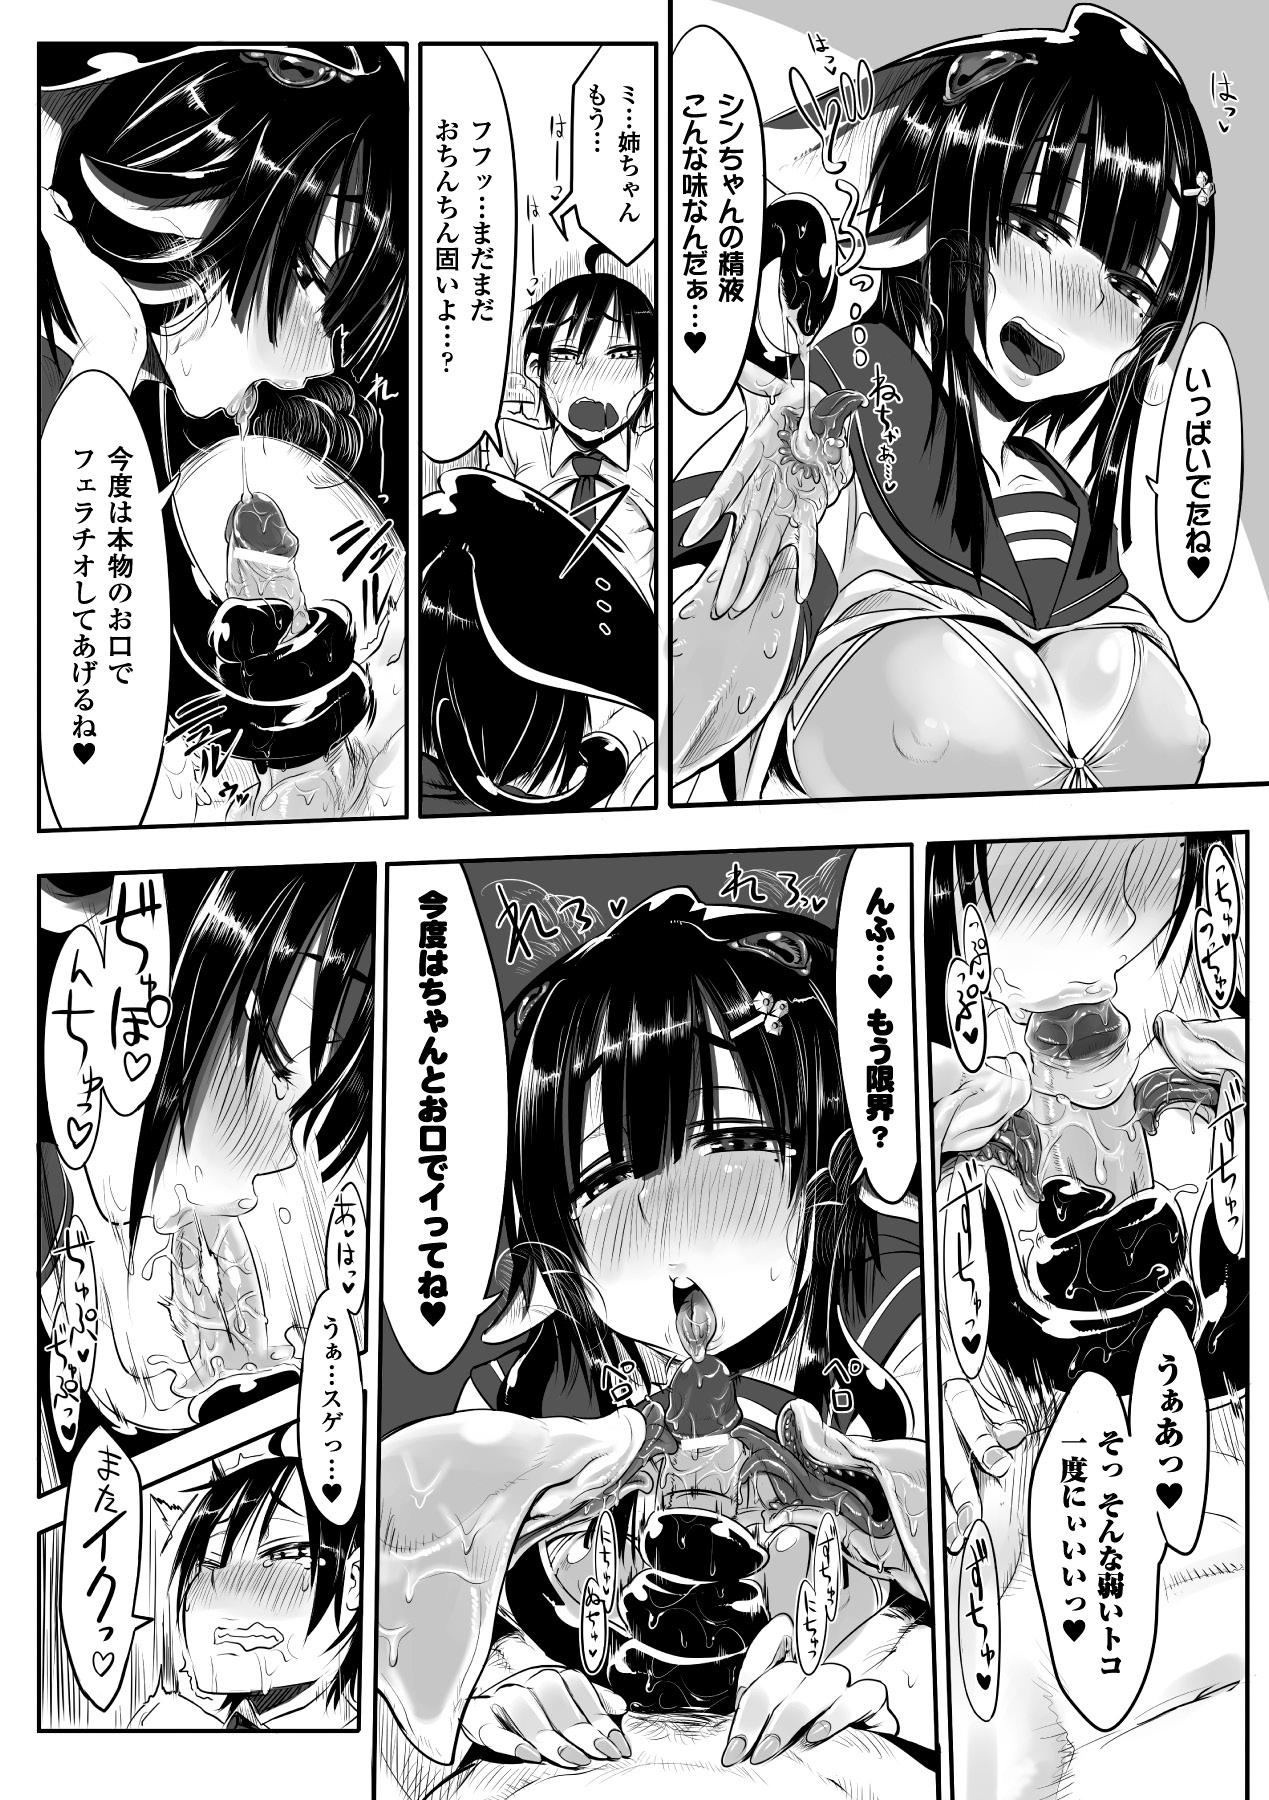 Caught Bessatsu Comic Unreal Monster Musume Paradise Vol. 4 Hot Whores - Page 10